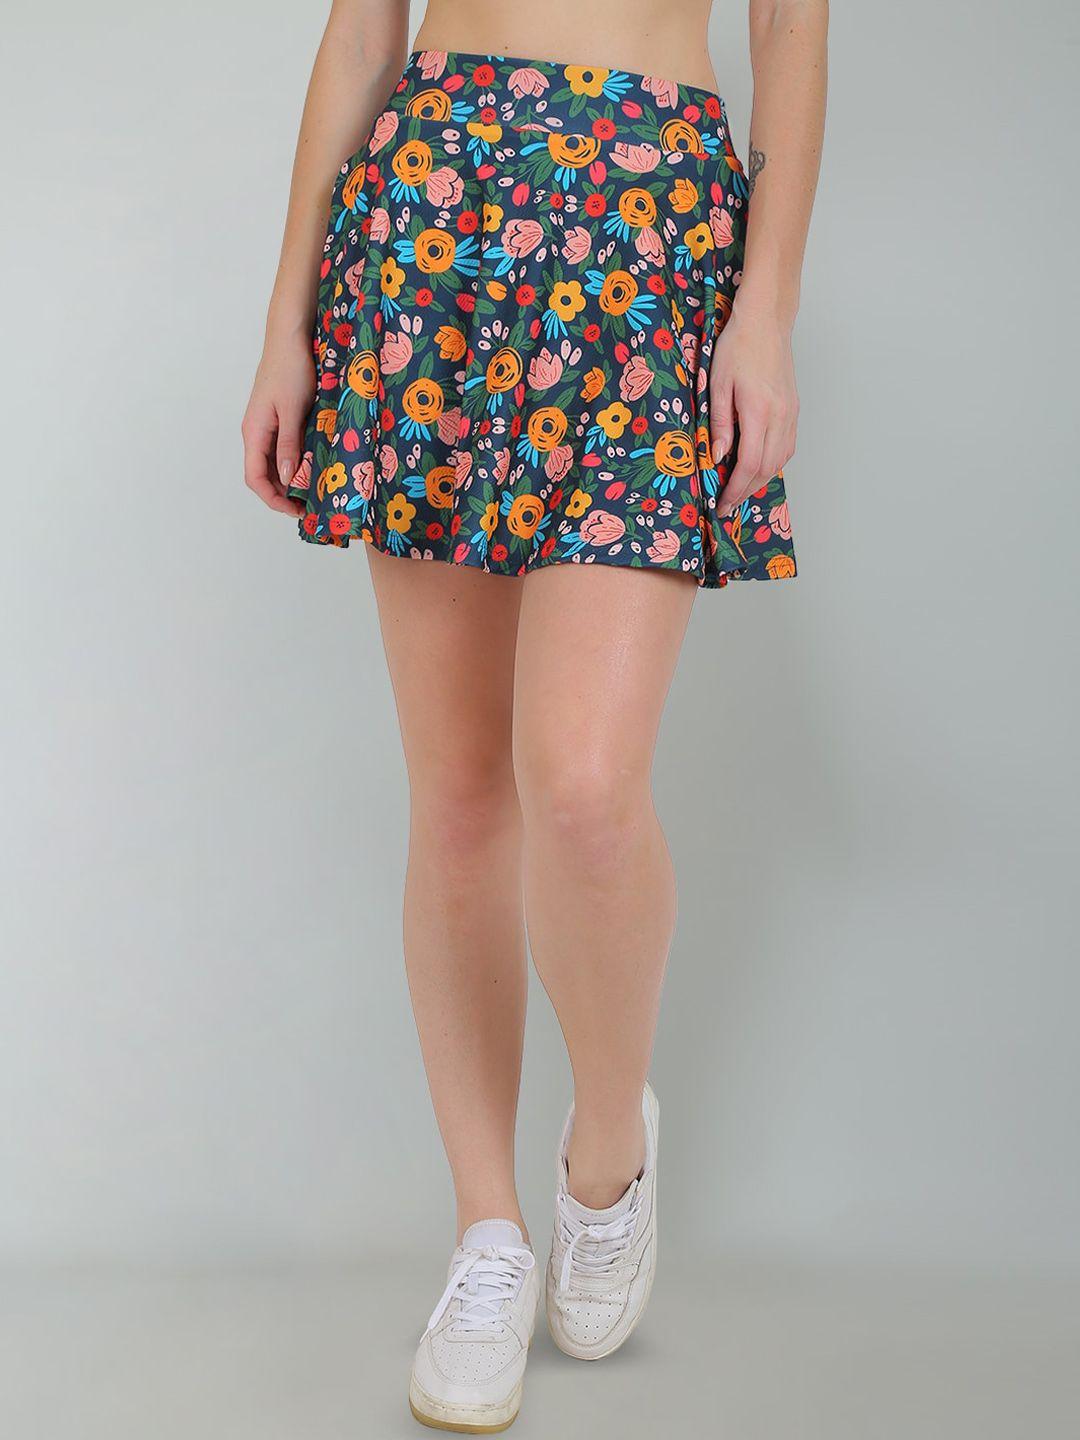 n-gal printed mini skorts skirt with attached inner short